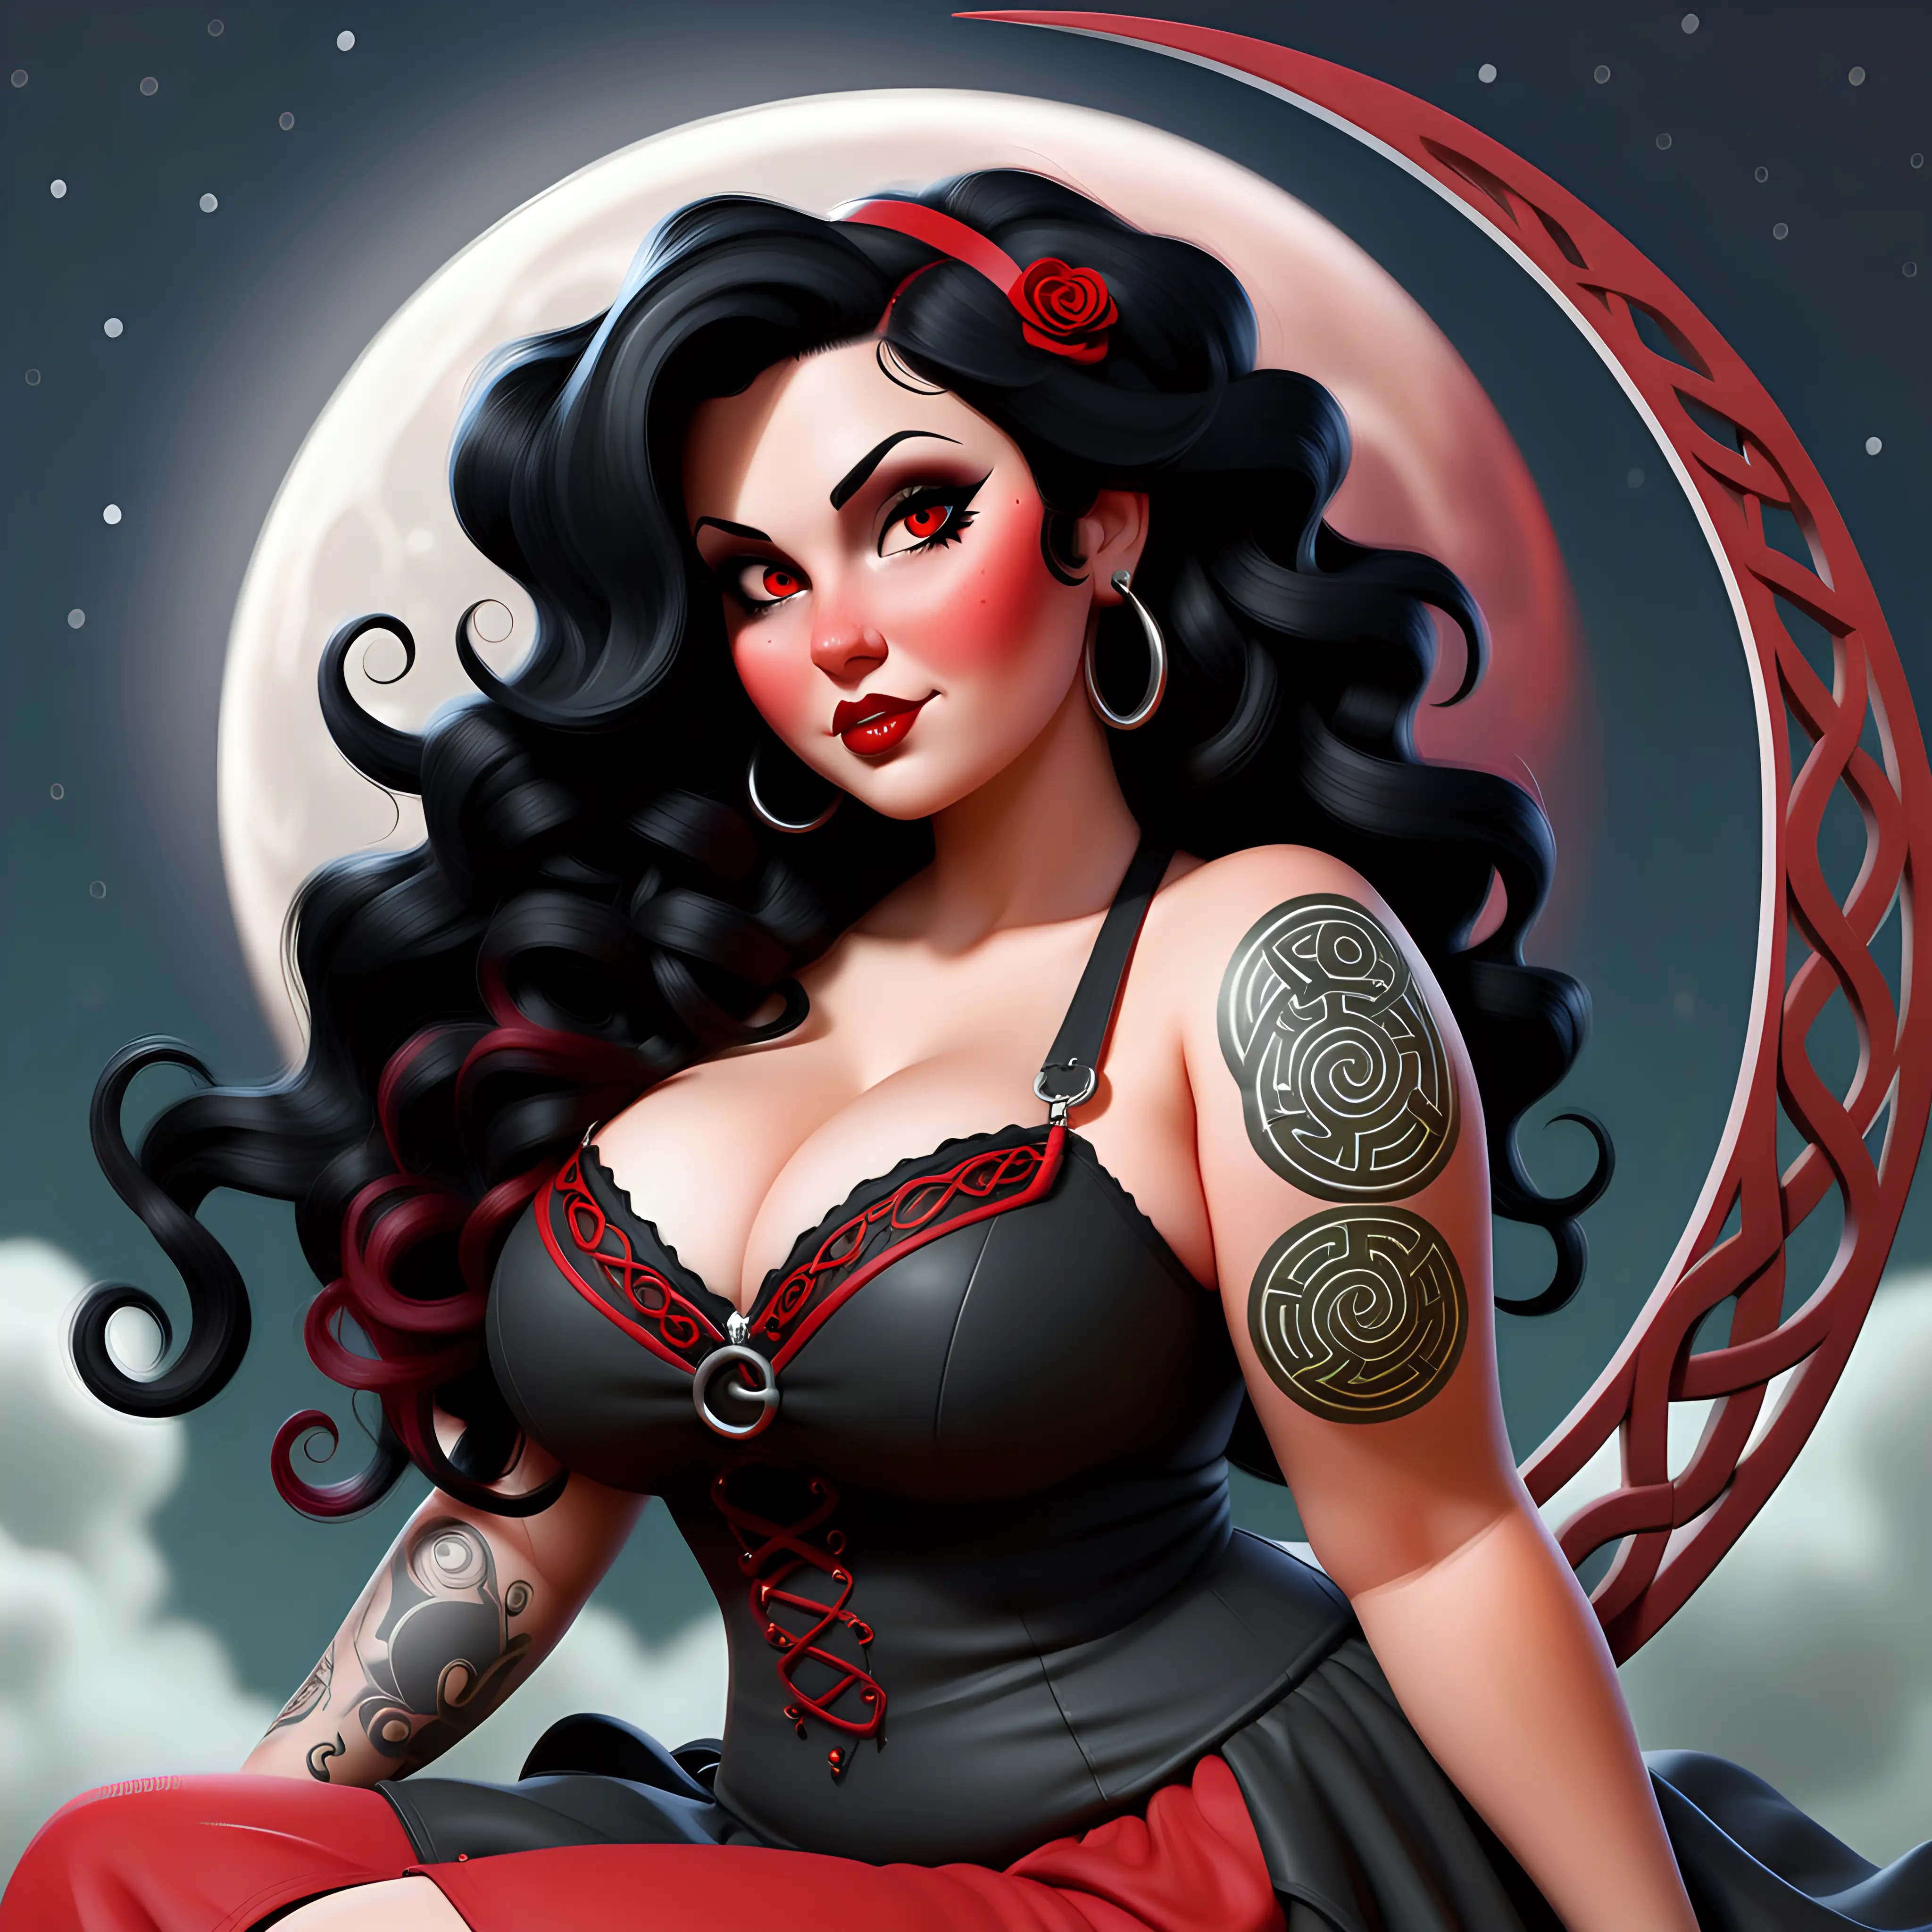 A female long, wavy black hair with red highlights. Brown eyes, small pixie like nose. Very curvy plus size body. Rockabilly style. Sitting on a cresent moon with Celtic symbols on it. 